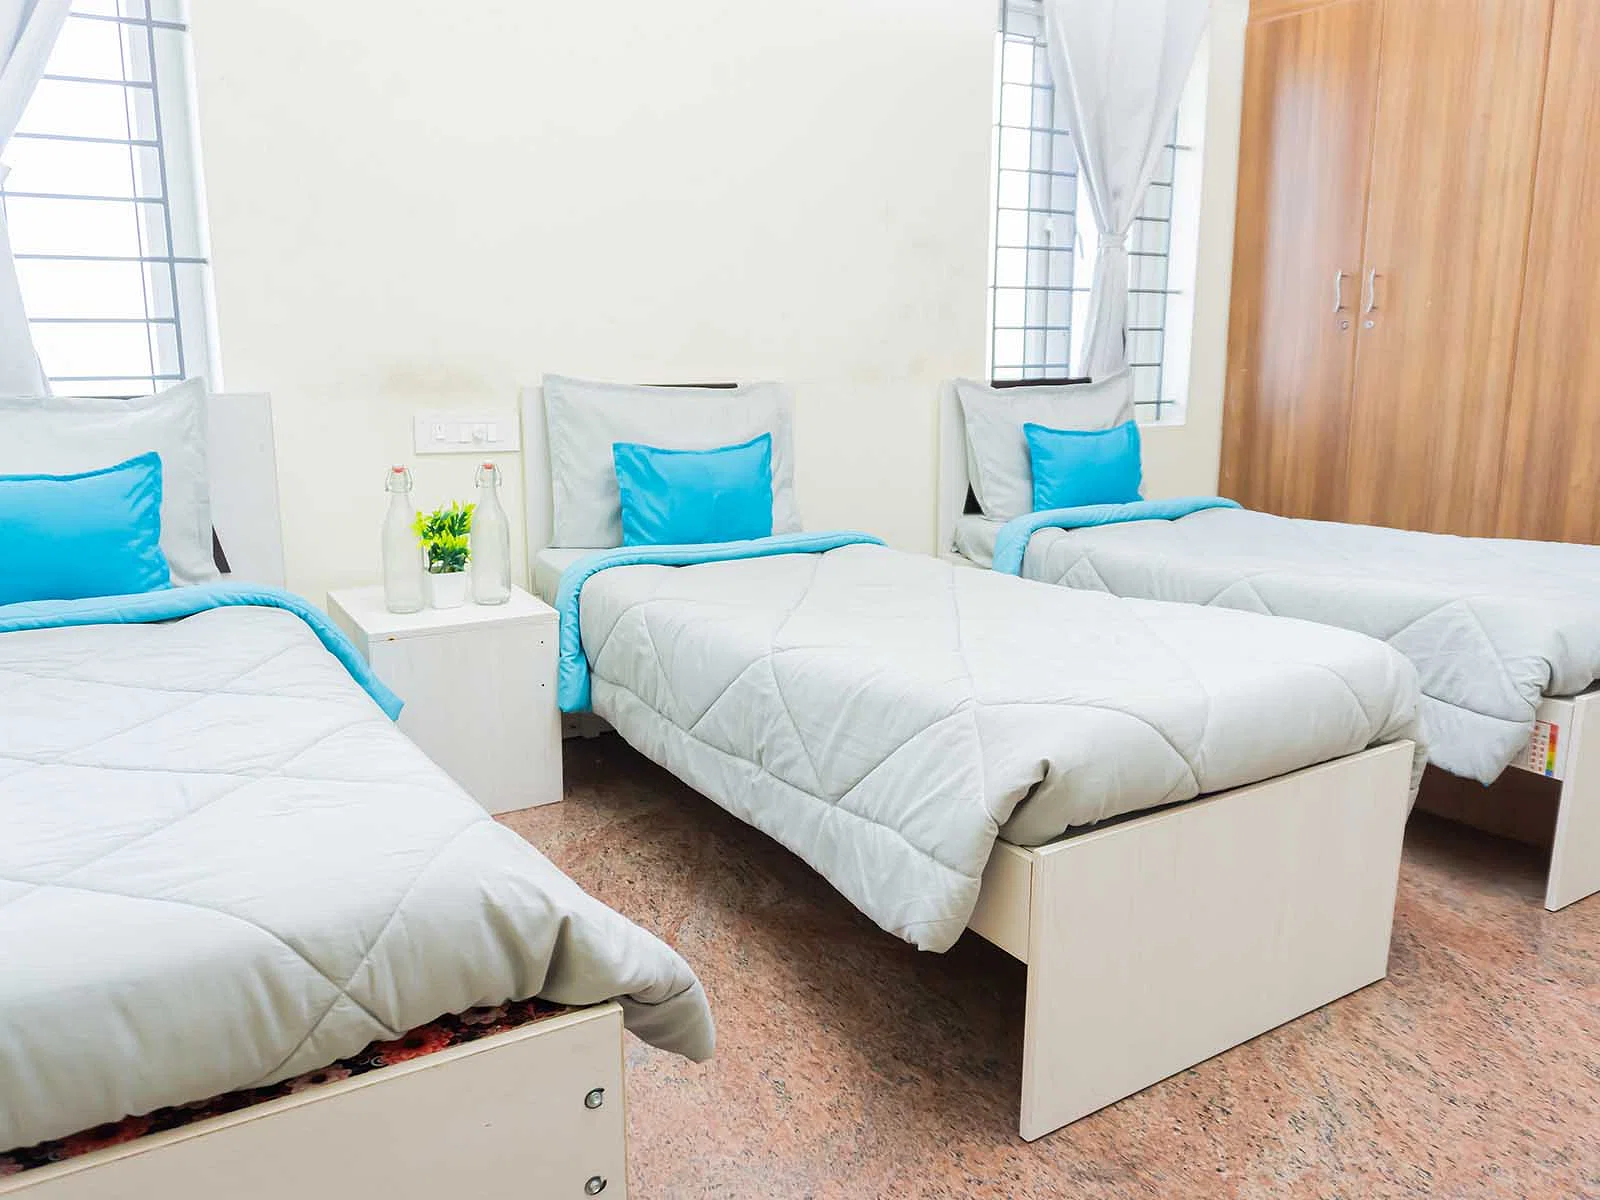 safe and affordable hostels for gents students with 24/7 security and CCTV surveillance-Zolo Upstream